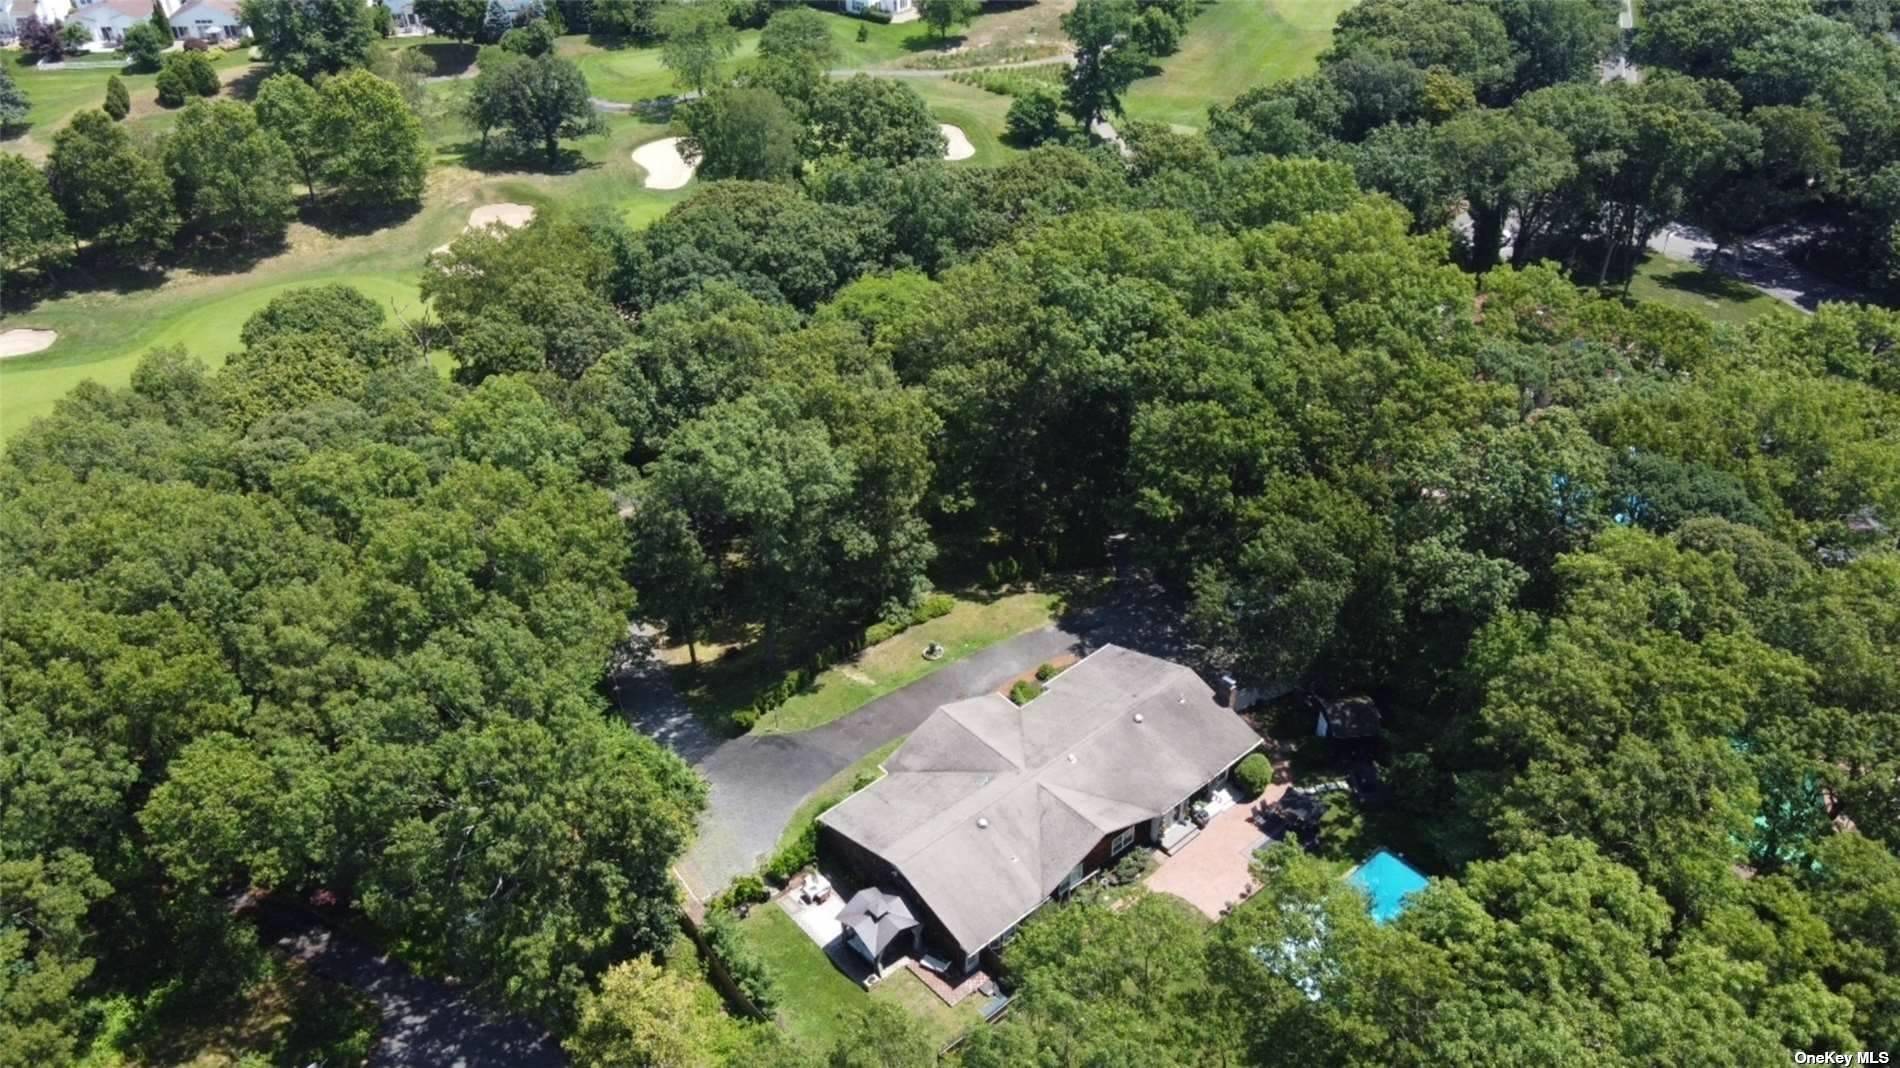 an aerial view of a house with a yard and outdoor seating